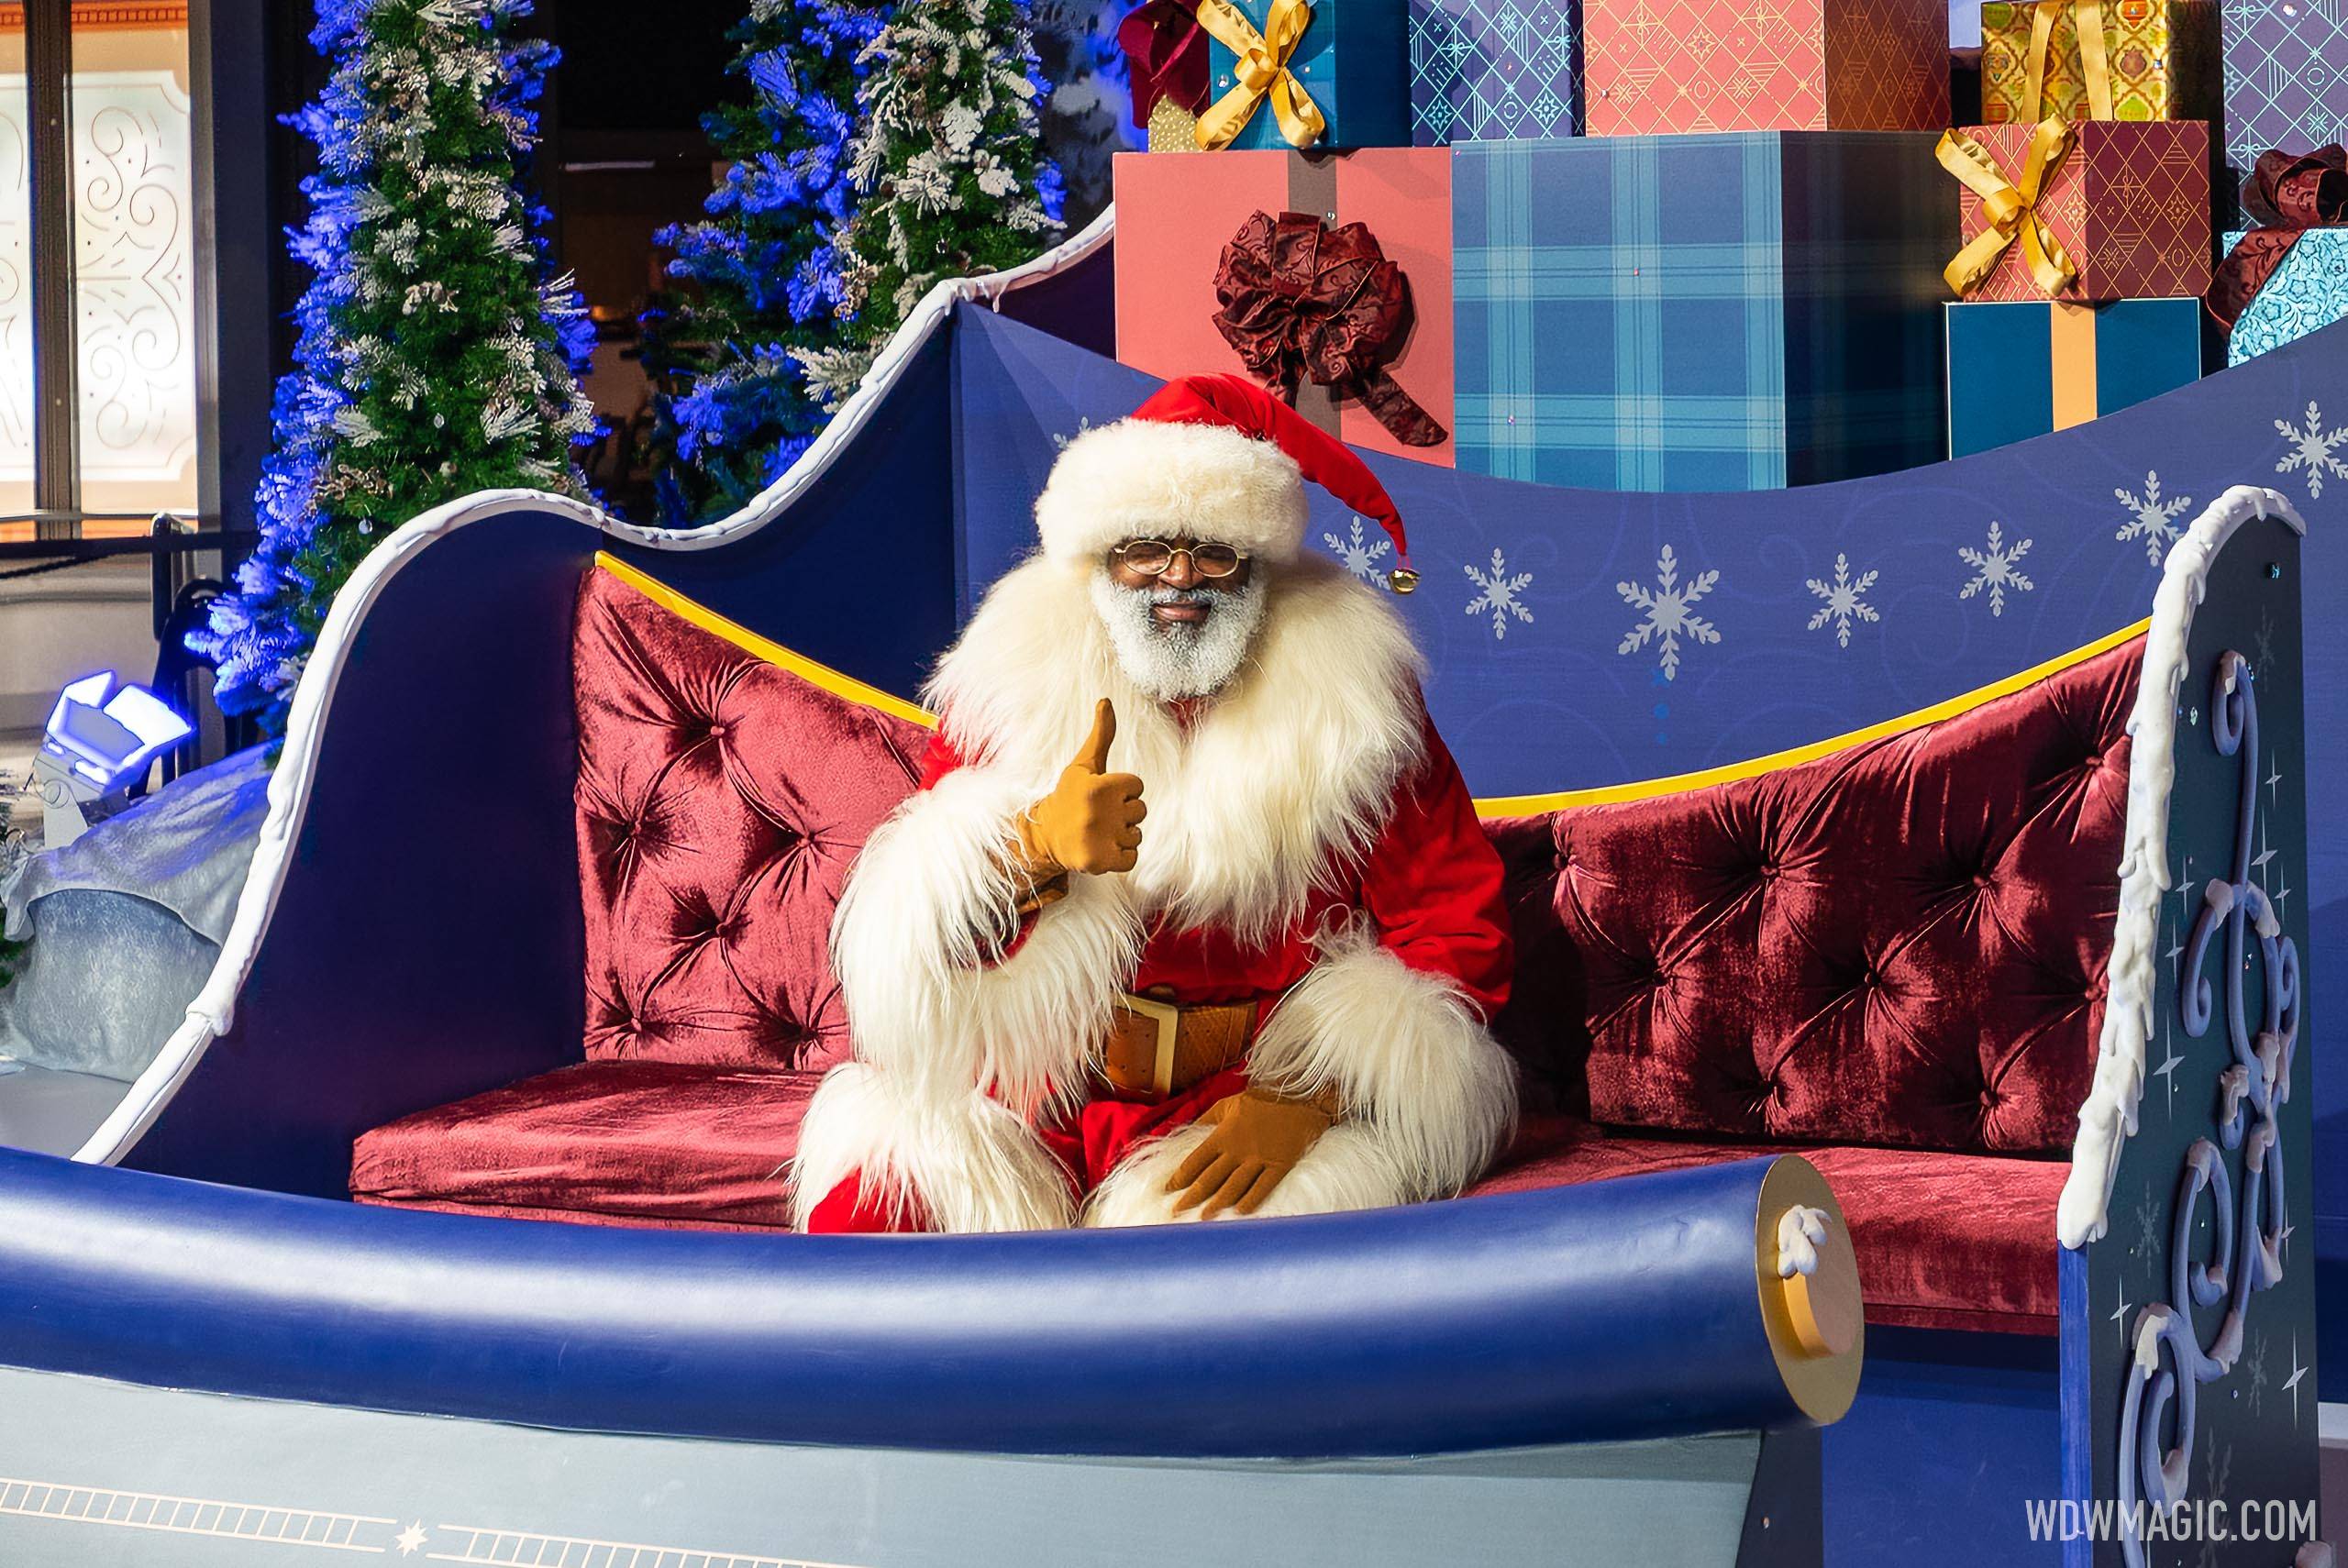 Where to meet Santa Claus at Walt Disney World during the EPCOT International Festival of the Holidays